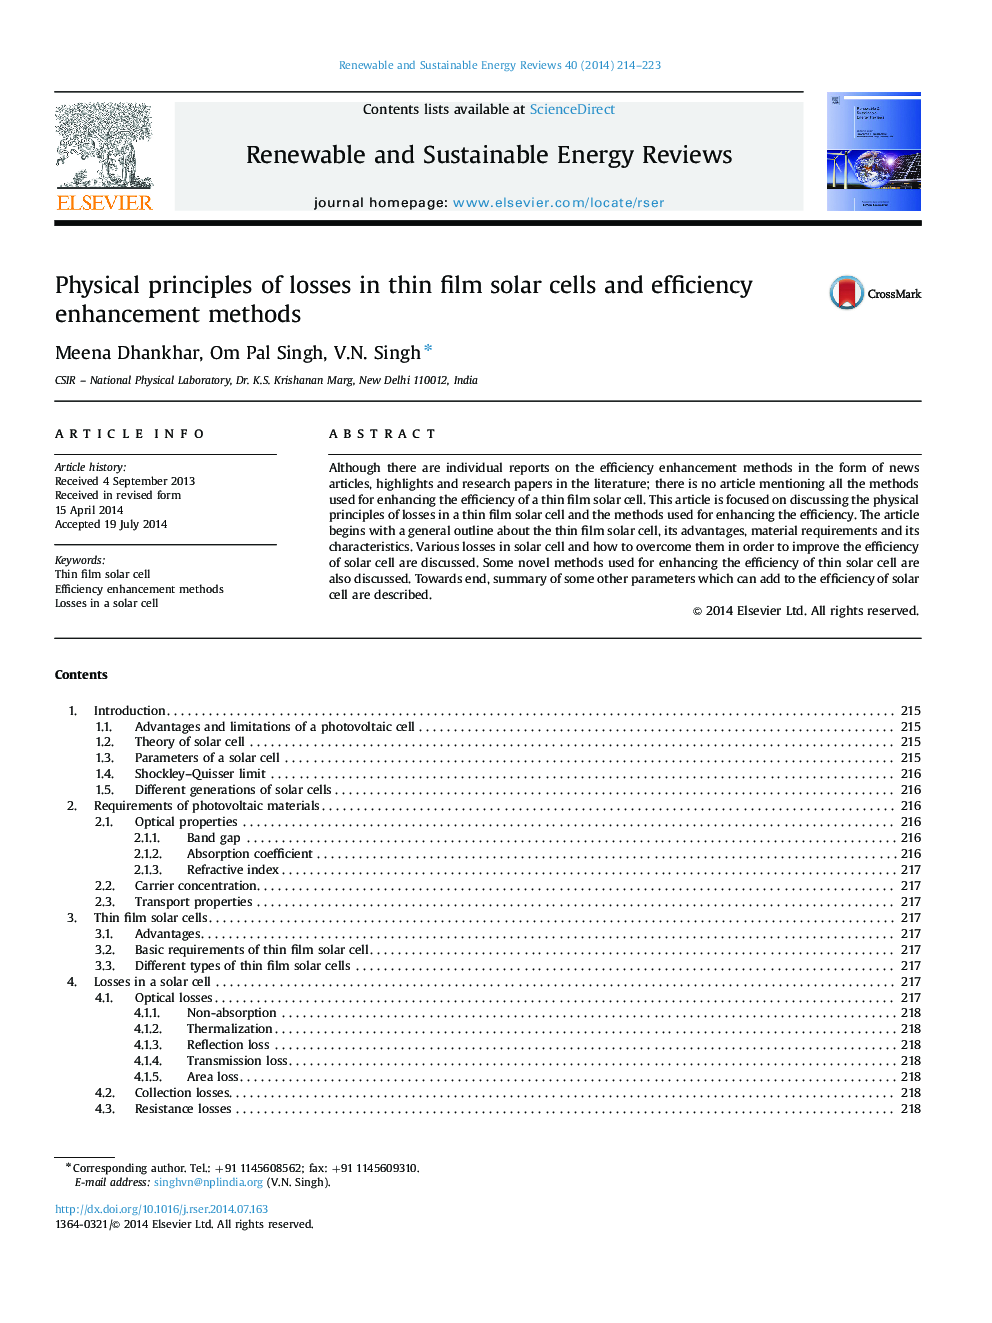 Physical principles of losses in thin film solar cells and efficiency enhancement methods